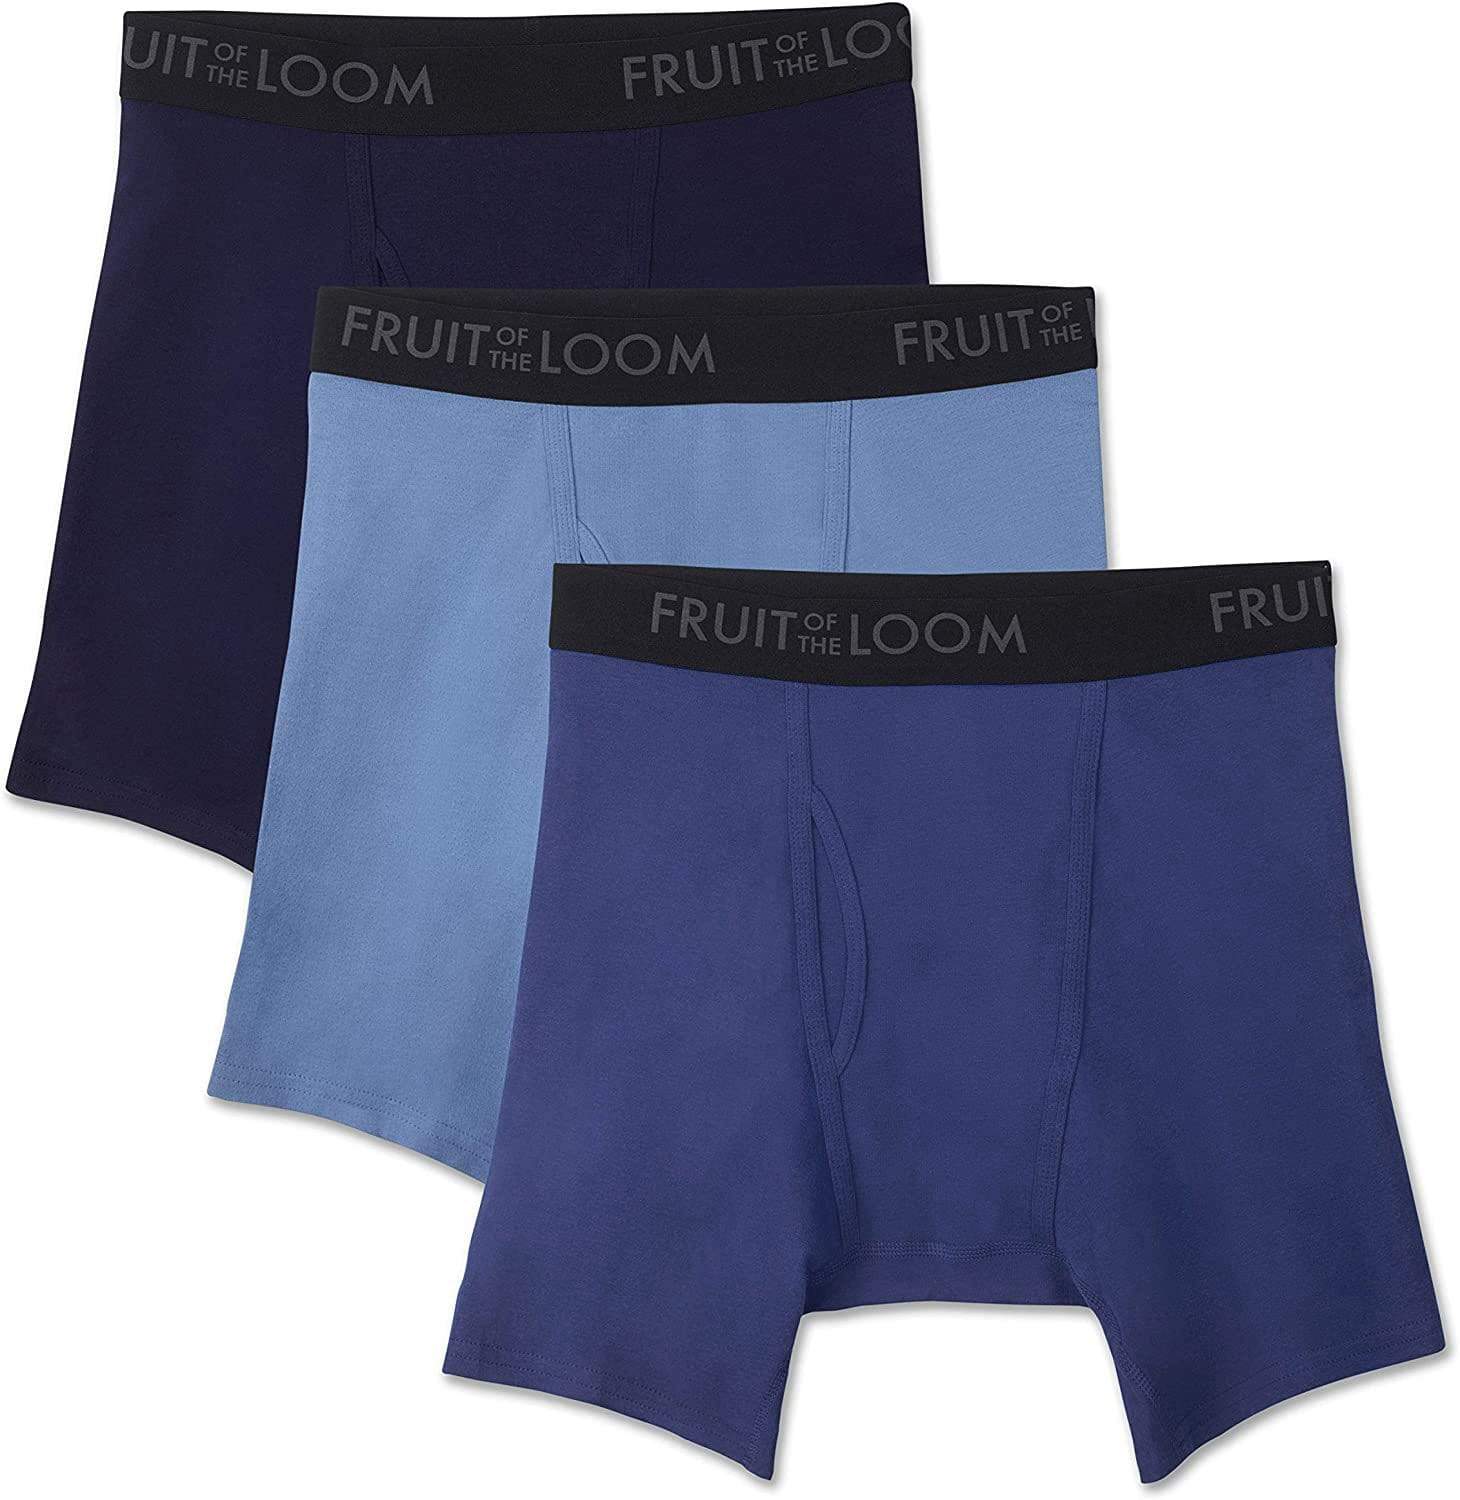  Fruit Of The Loom Mens Breathable Underwear Briefs